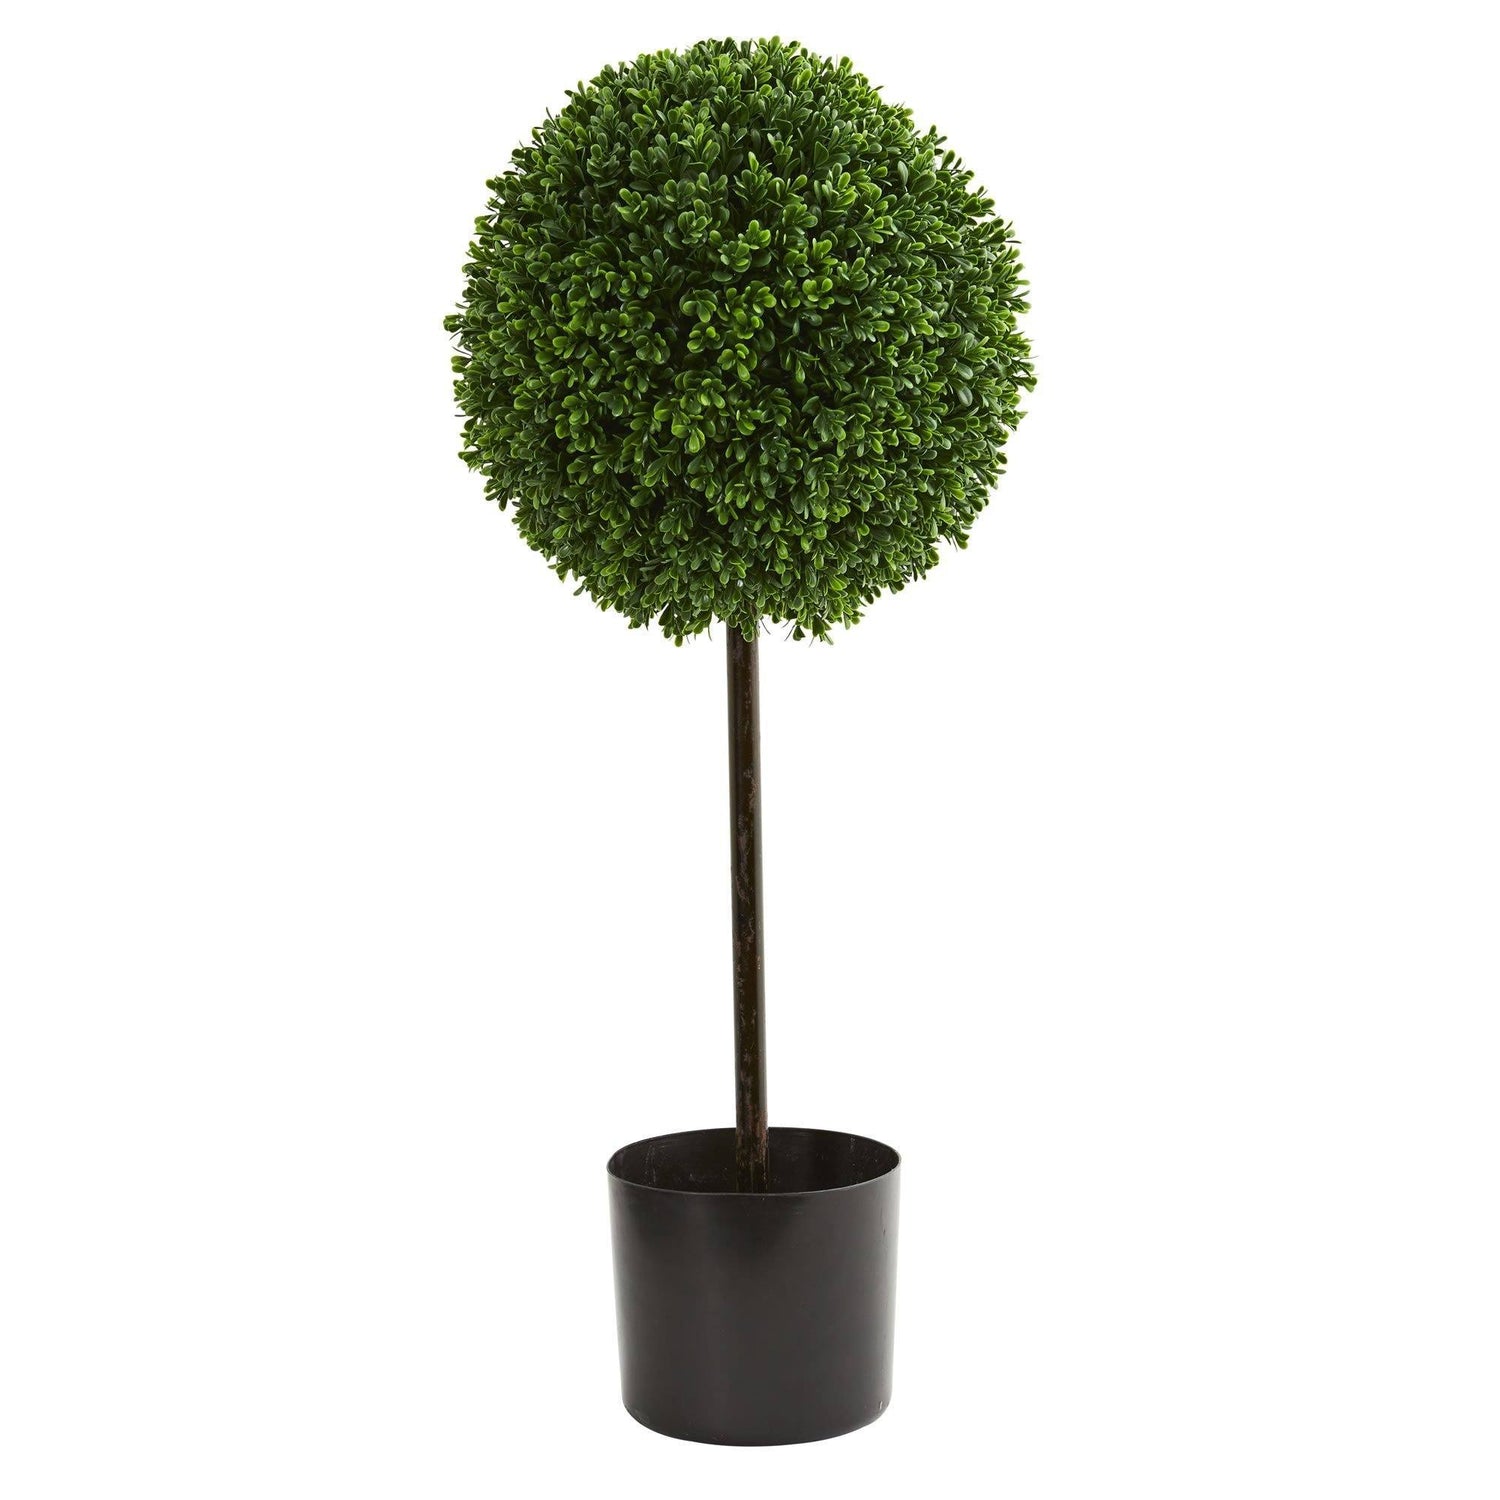 2.5’ Boxwood Ball Artificial Topiary Tree UV Resistant (Indoor/Outdoor)